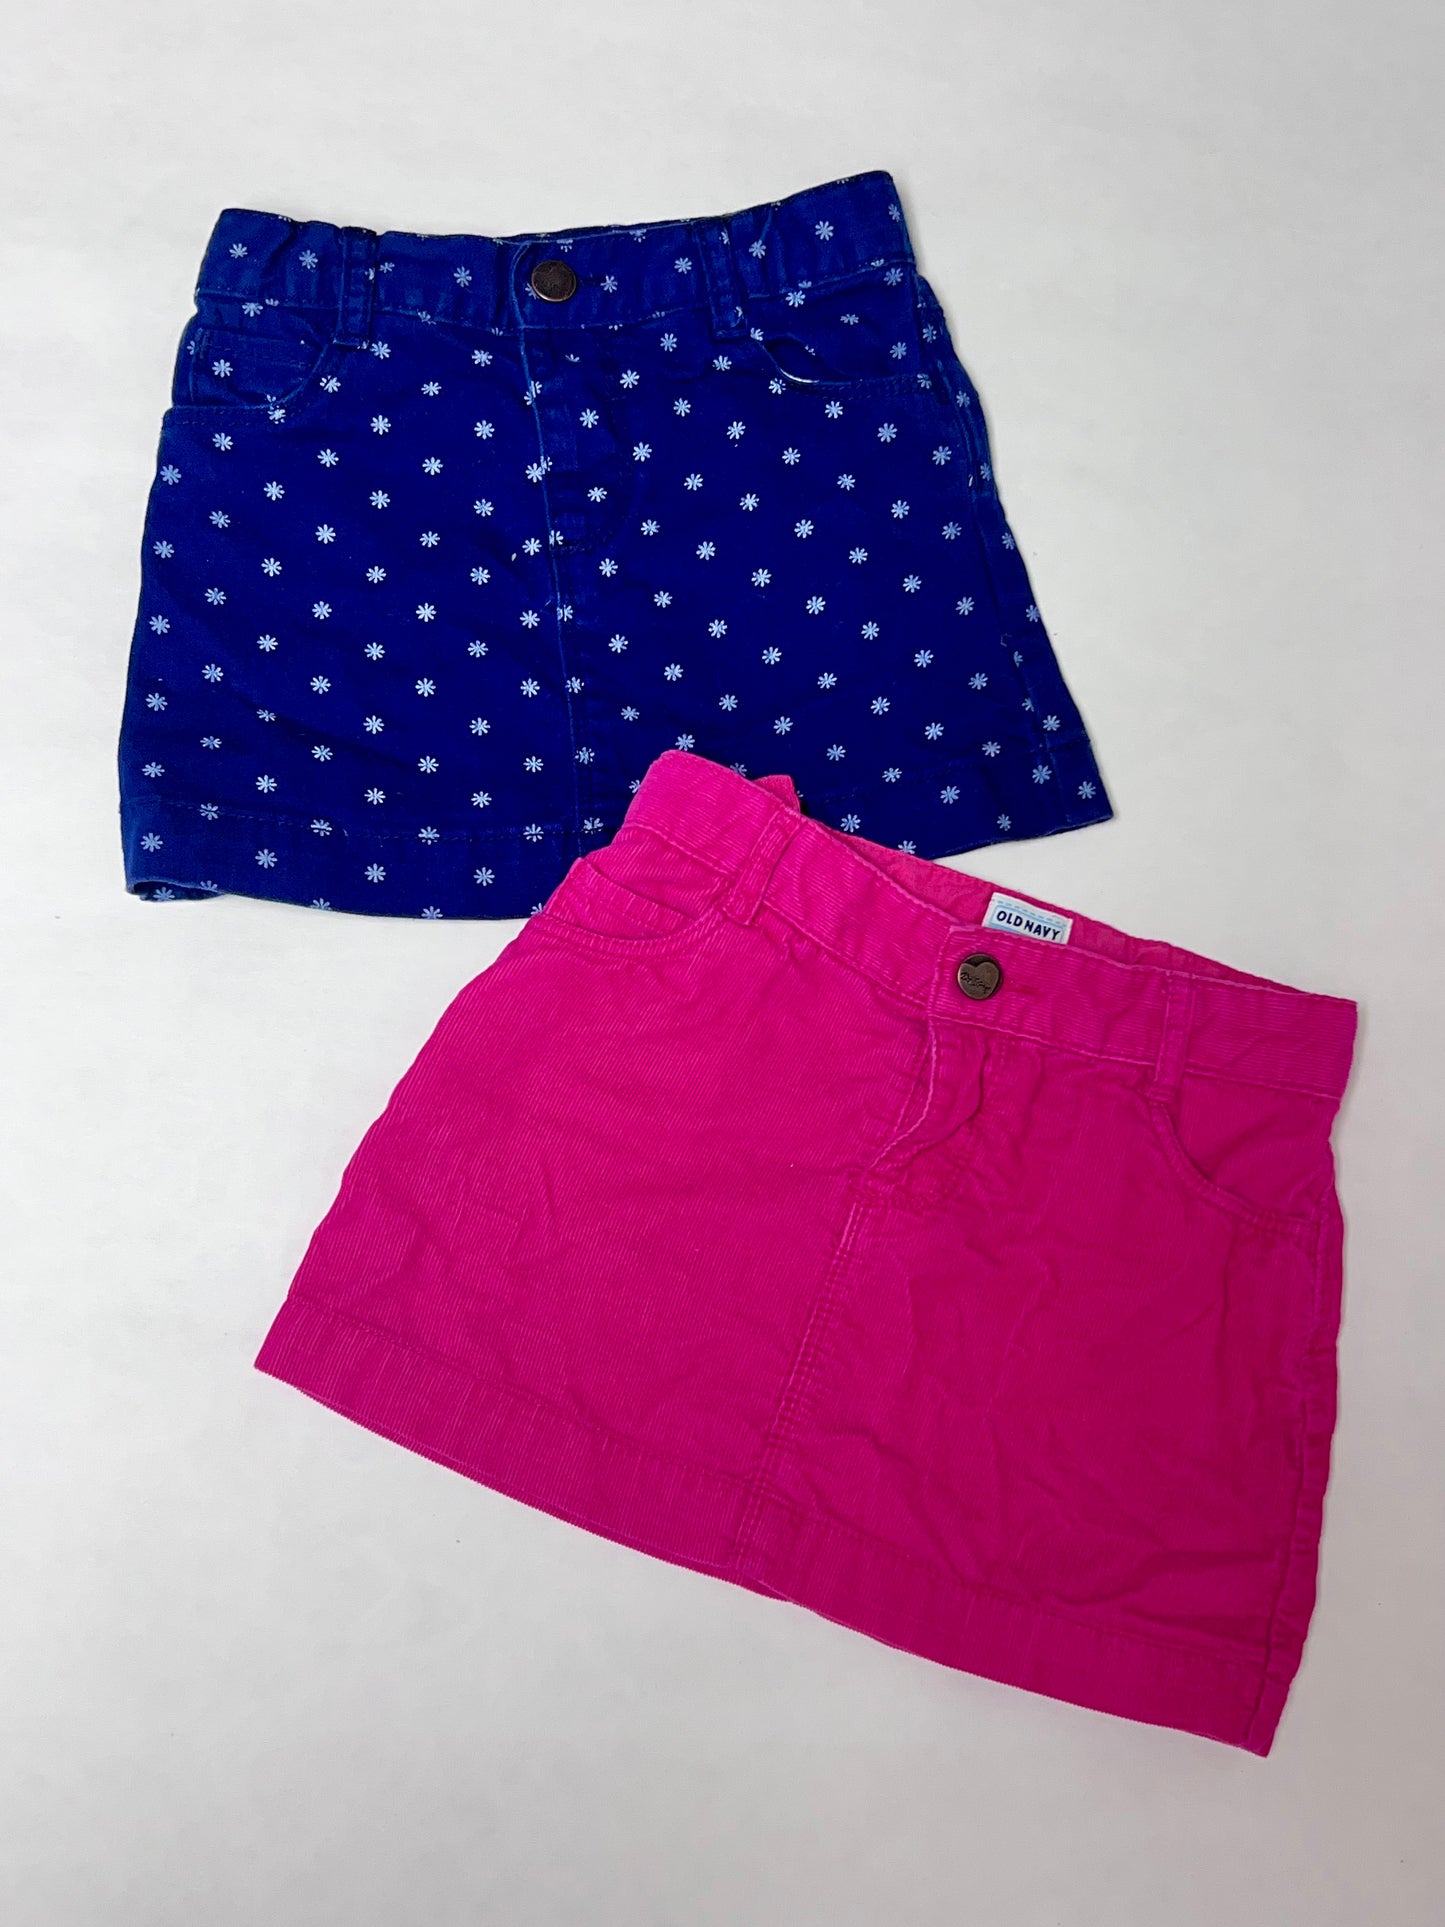 3T girls Old Navy mini skirt bundle: hot pink corduroy and navy with flowers. EUC.